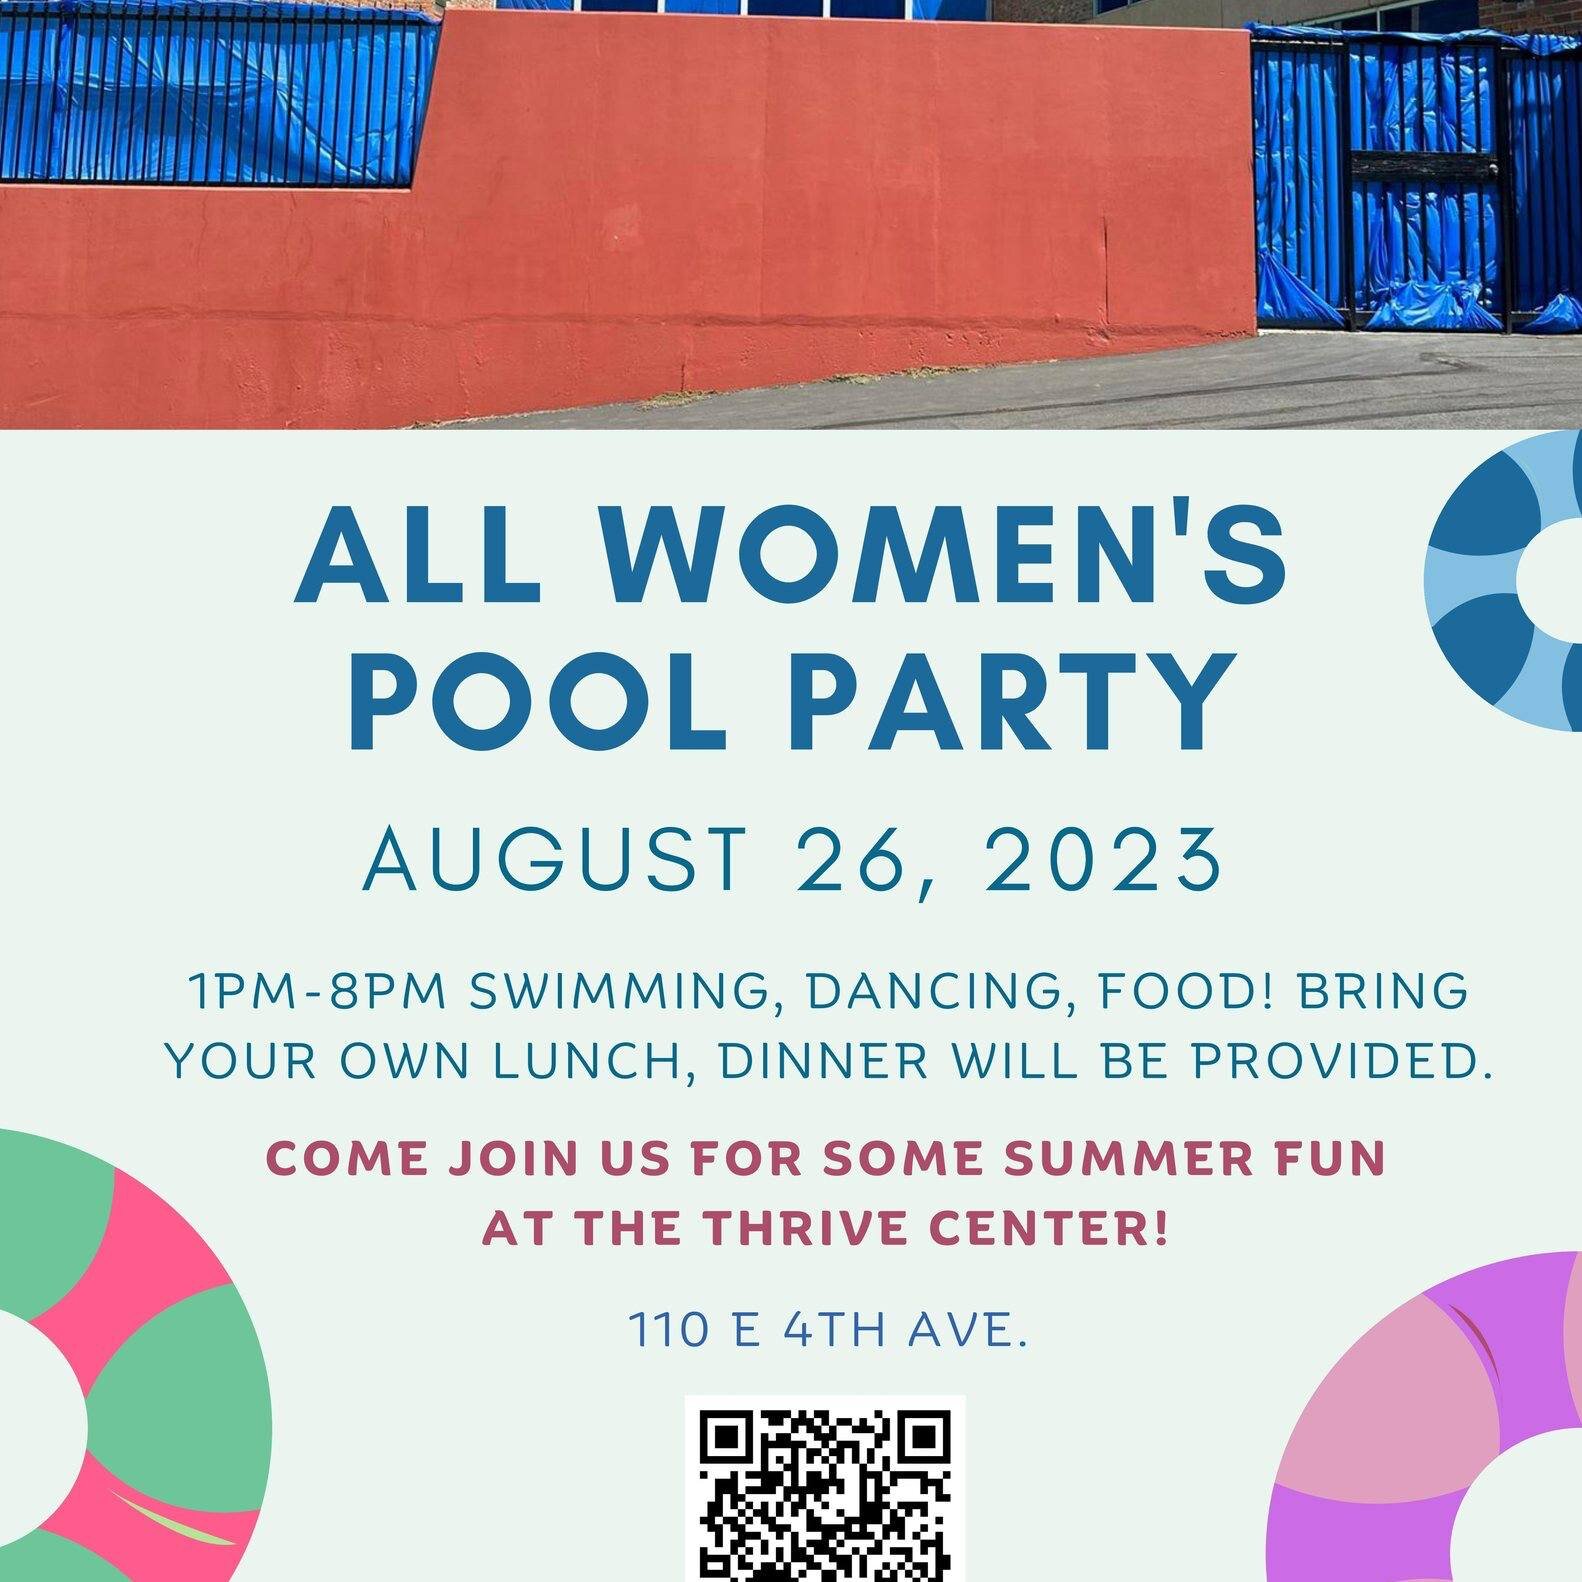 Volunteers needed! 📣📣

We are urgently looking for volunteers who can help our upcoming events this week. 

💛 Come celebrate womanhood with us! Join us at our all Women's Pool Party! Sign up here: https://www.signupgenius.com/go/10C094FABAB2CA7F8C